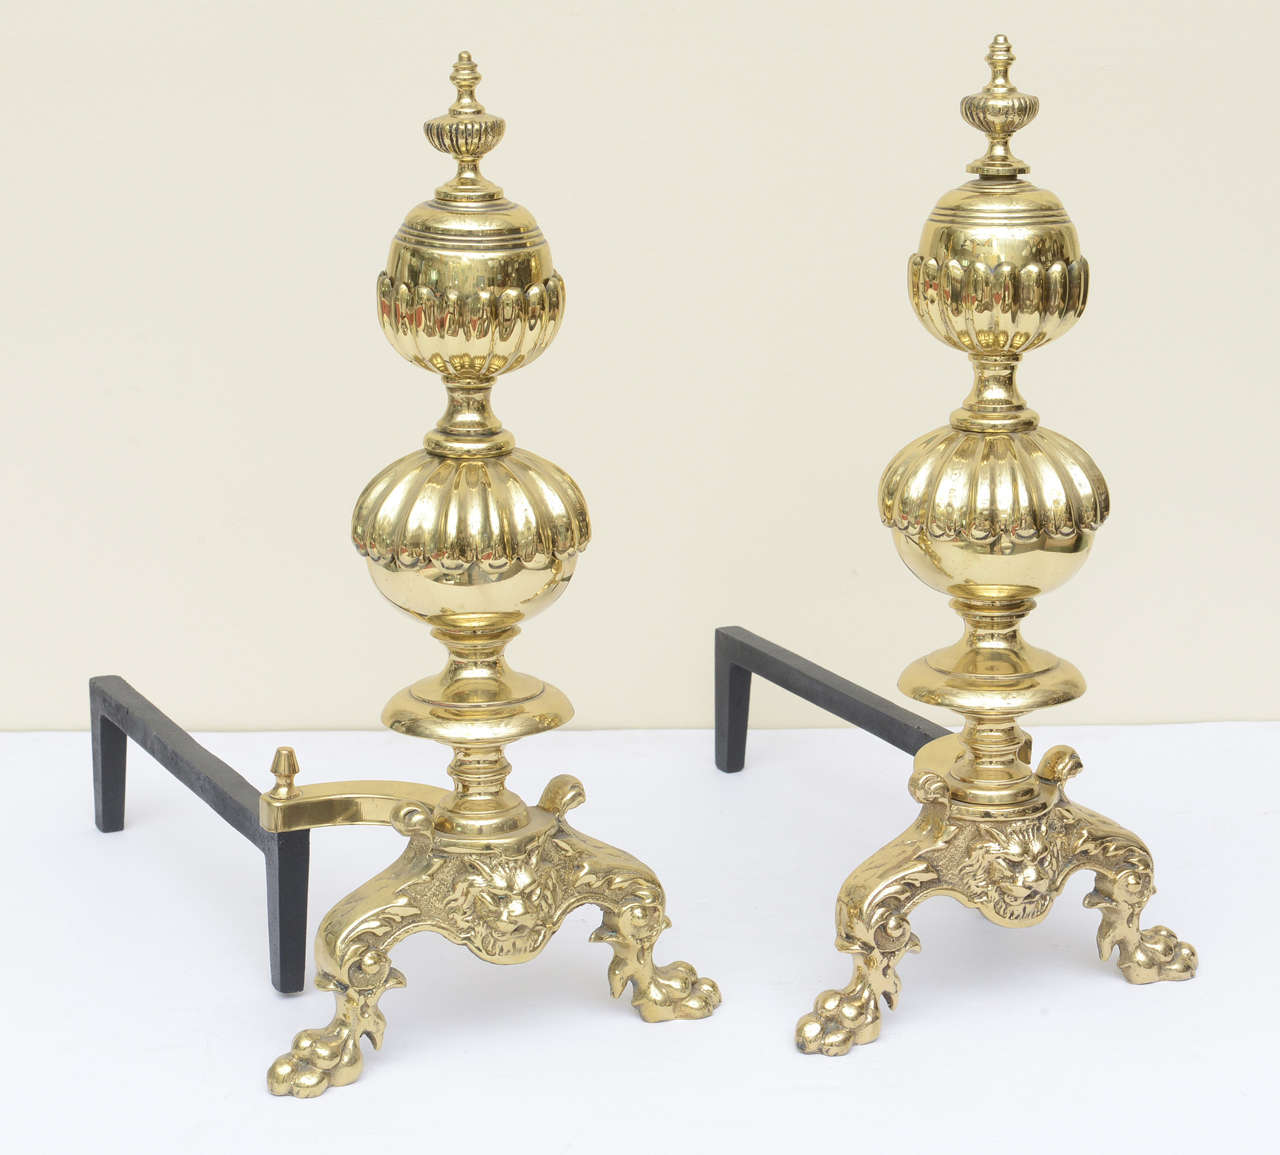 Monumentally oversized Georgian style andirons, solid brass plated, with lion-footed feet and lion head motif, with tiered, fluted bulbous middle extended to the large acorn-like finial tops, and capped tops.